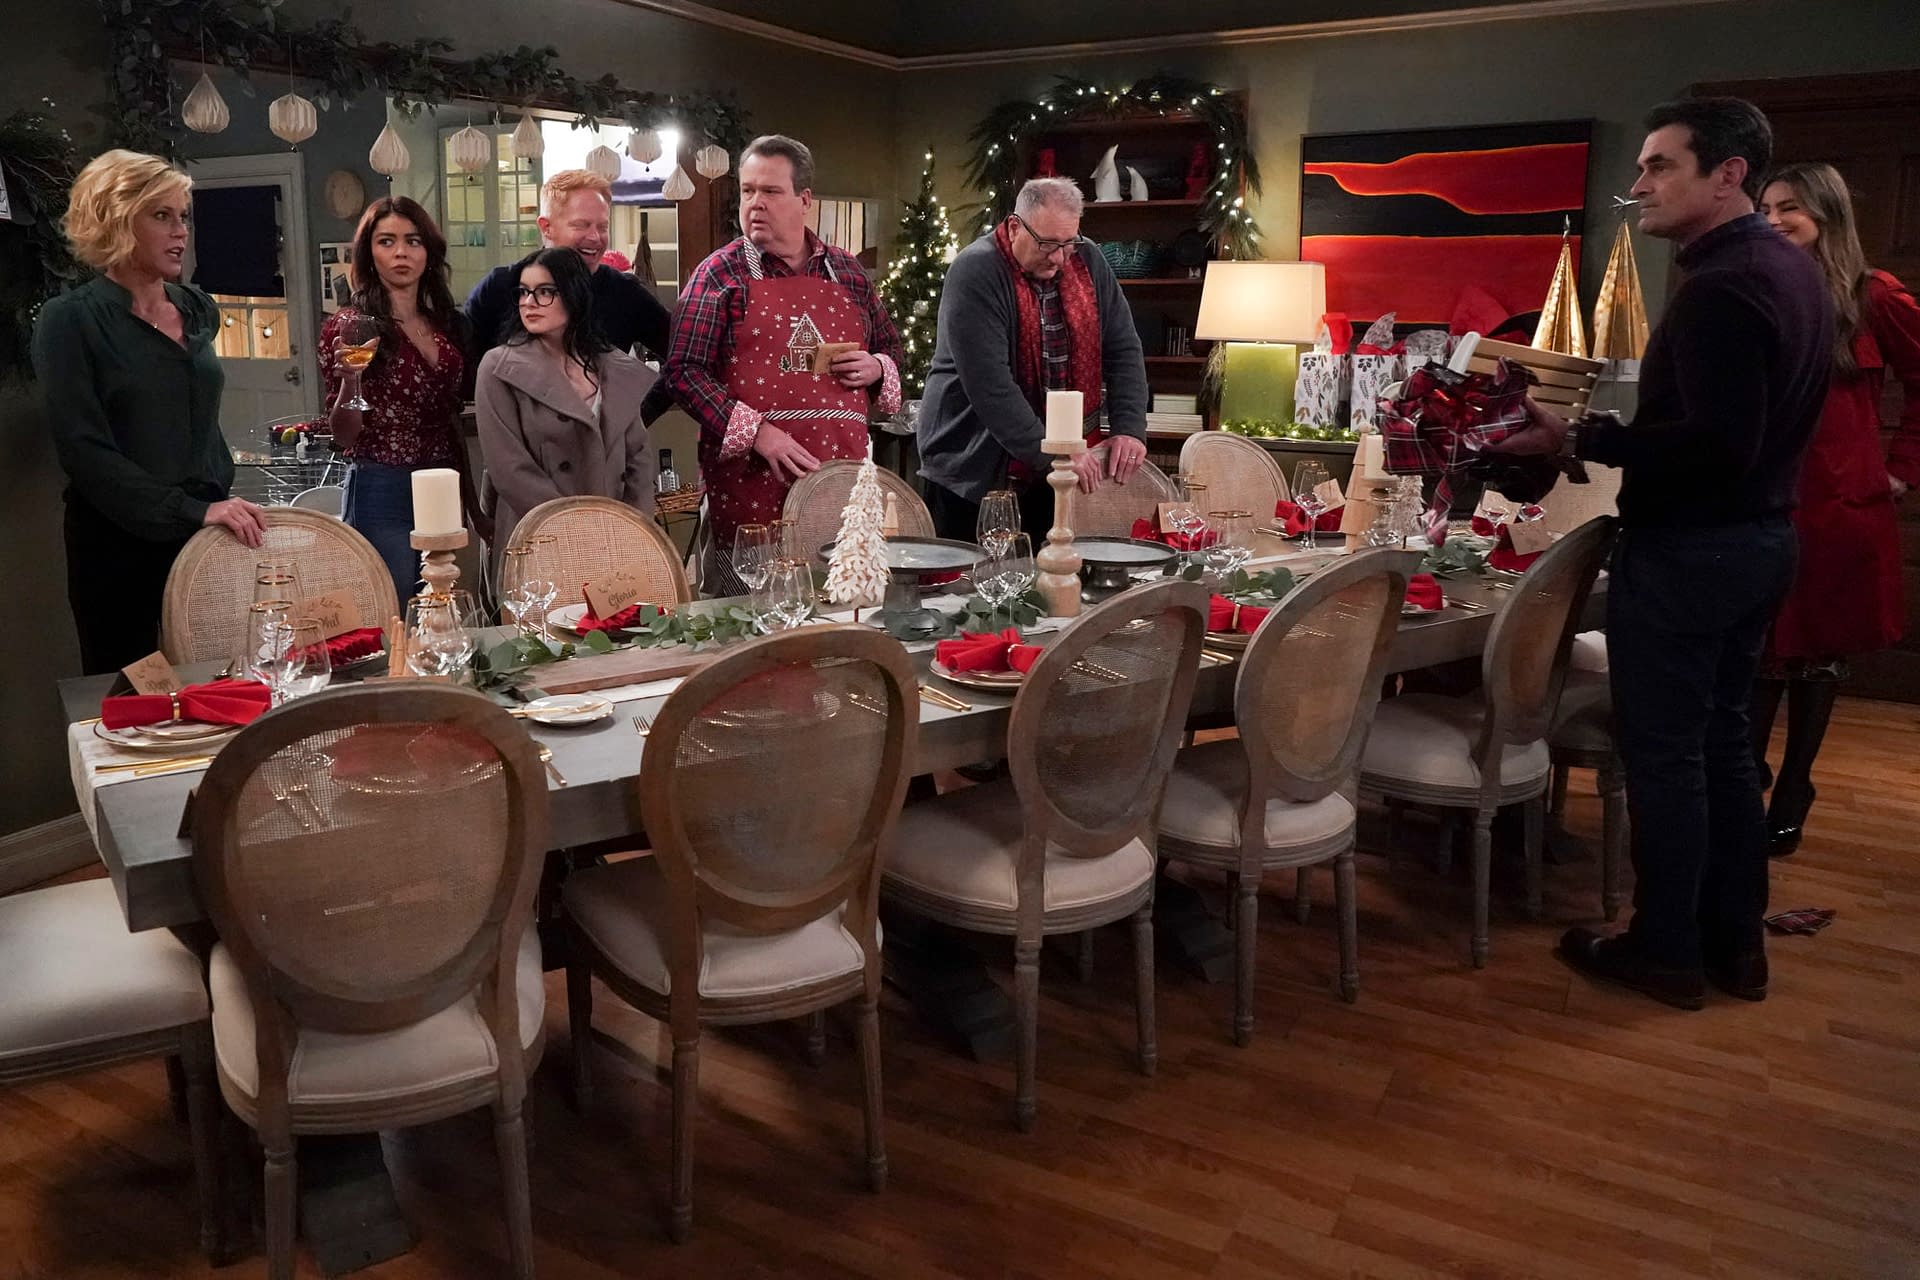 "Modern Family" Season 11: Will "The Last Christmas" Find Cam, Mitch &#038; Lily Missouri-Bound? [PREVIEW]